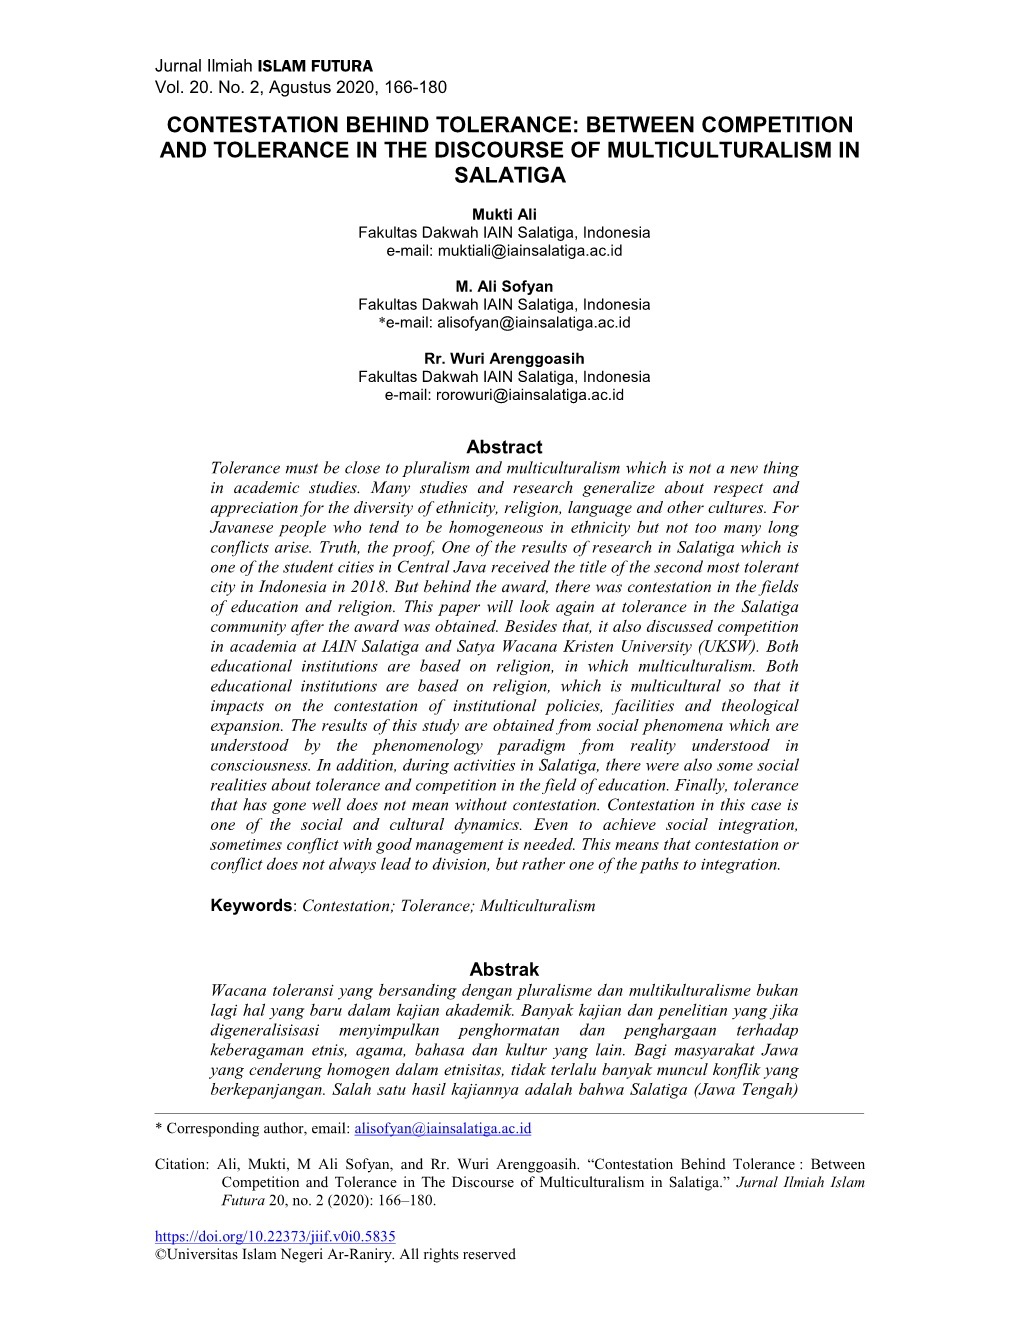 Between Competition and Tolerance in the Discourse of Multiculturalism in Salatiga